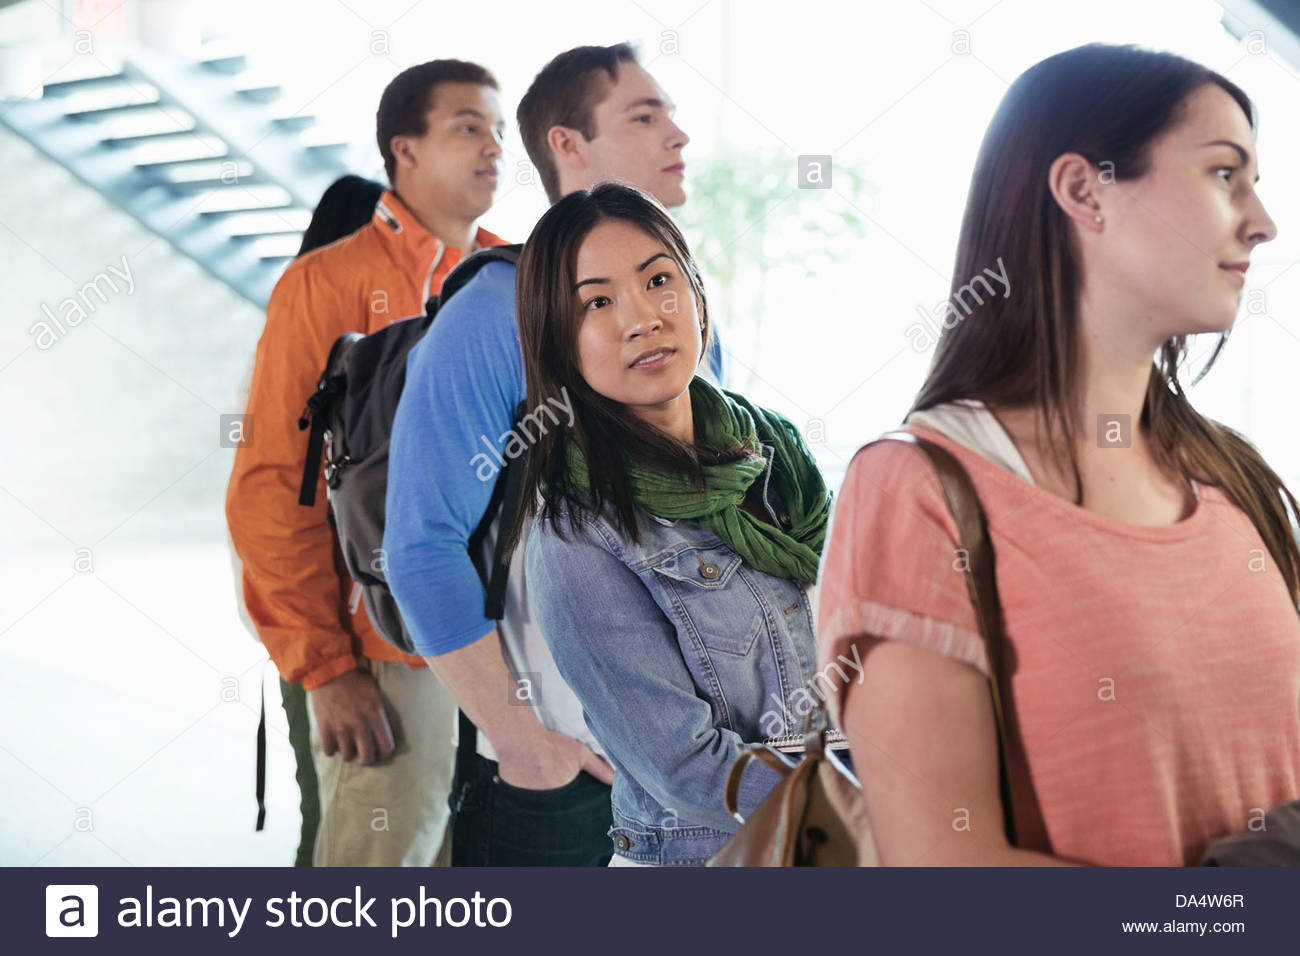 Group of students standing in line at college campus Stock Photo